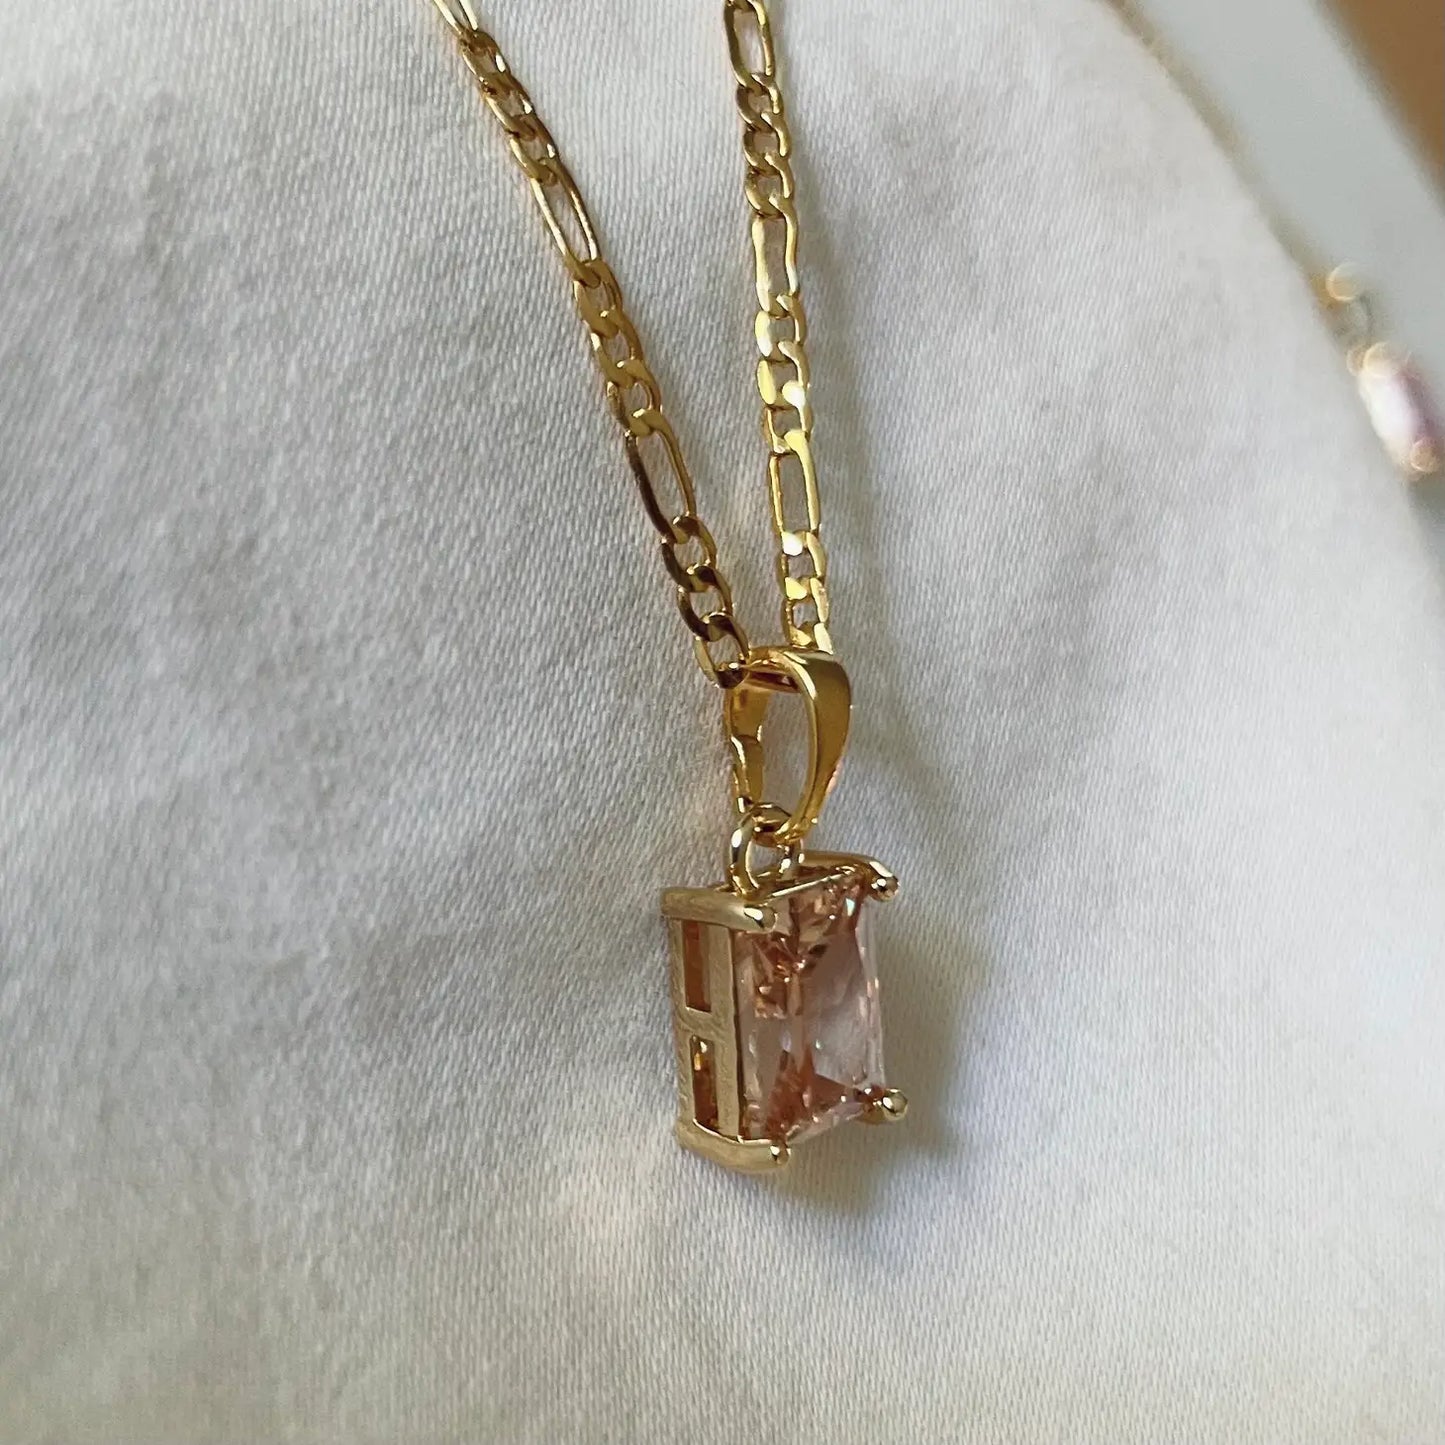 Peach Faceted Stone Necklace